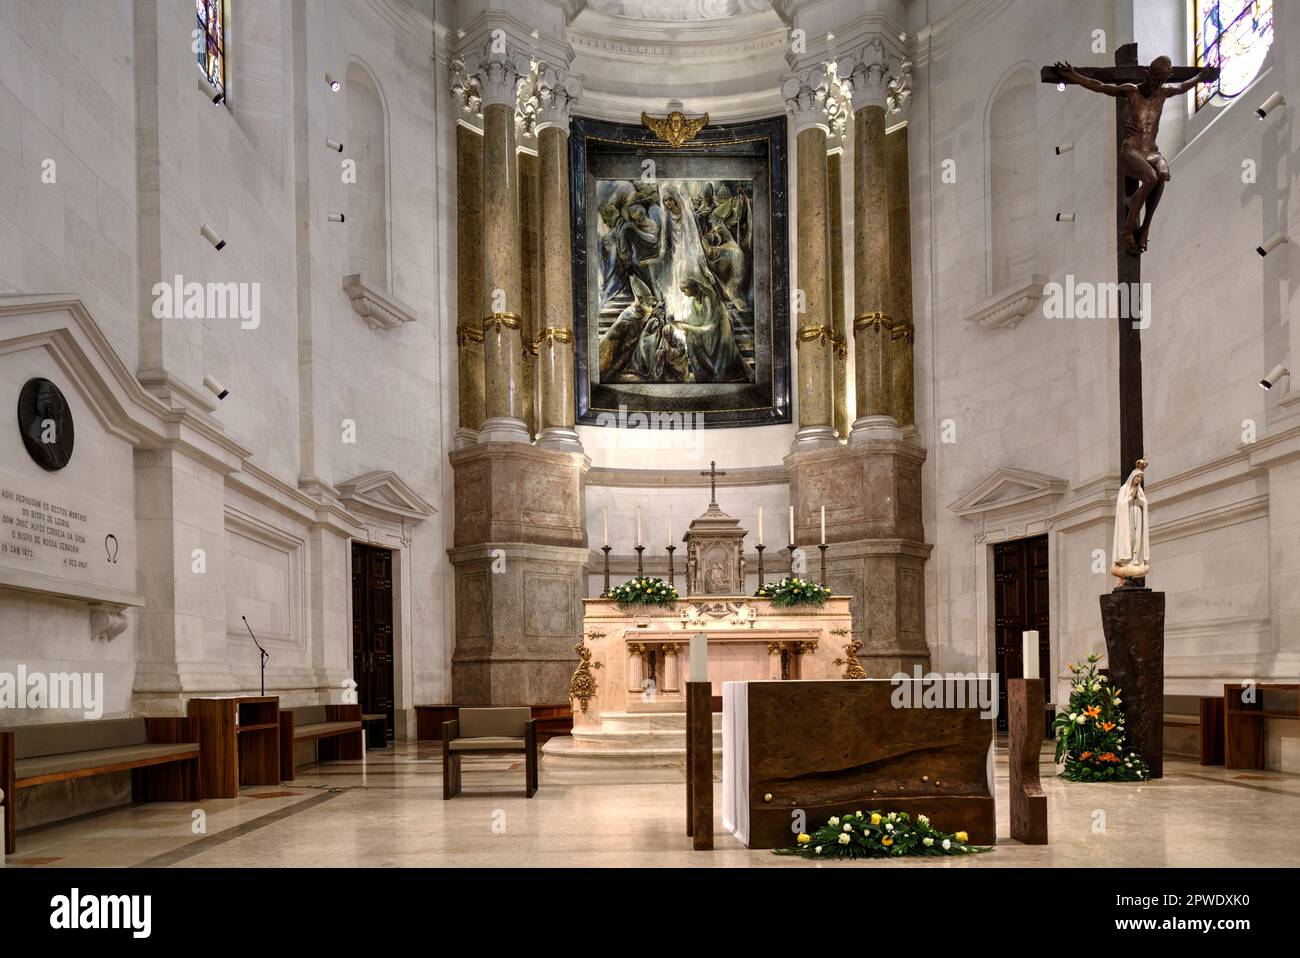 Fatima, Portugal - August 15, 2022: Close up of altar within Sanctuary of Our Lady of the Rosary of Fatima Basilica with congregation some motion blur Stock Photo